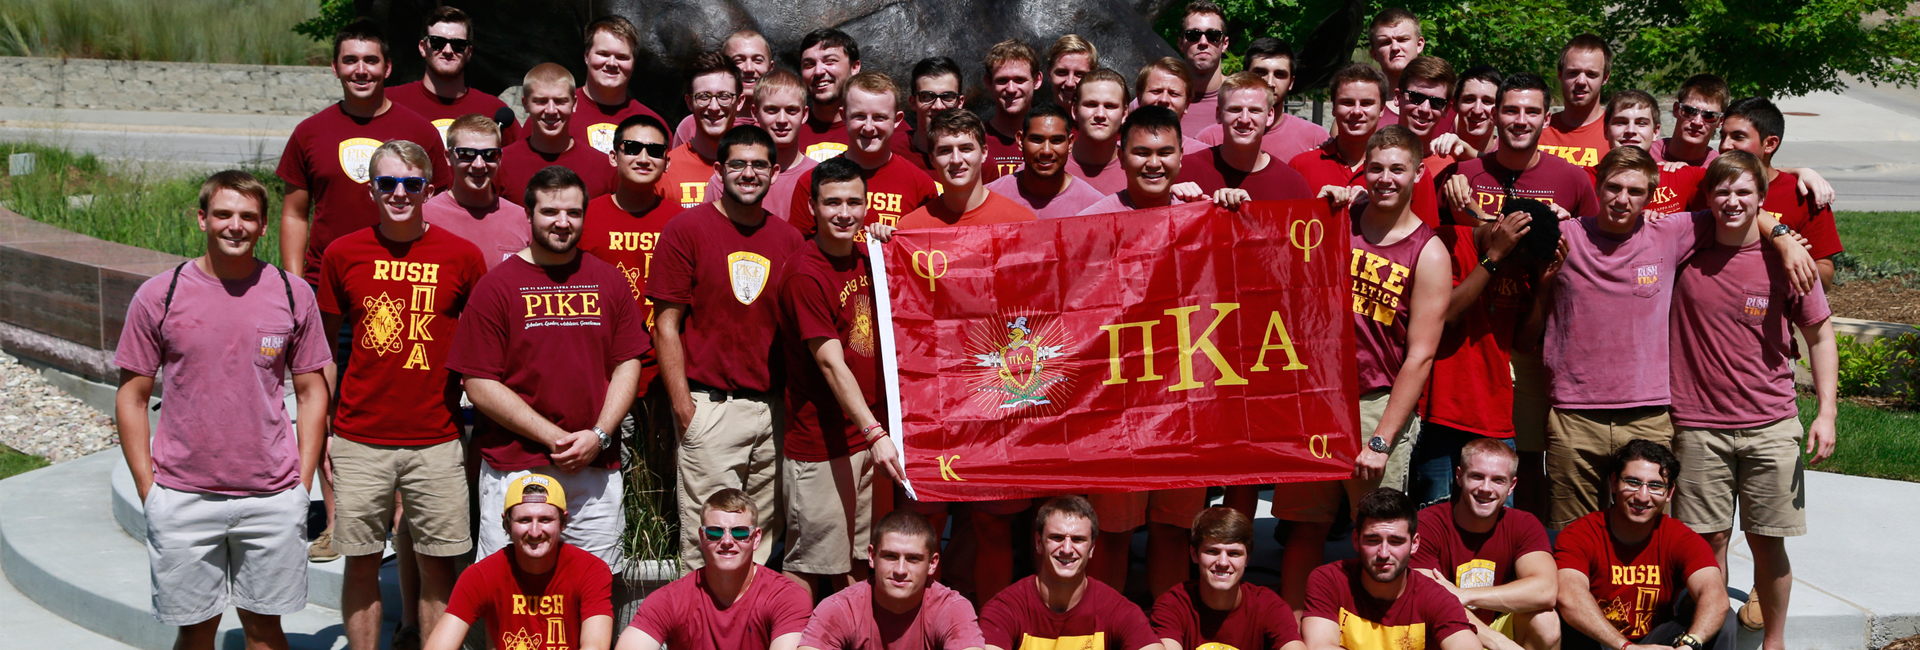 The men of Pi Kappa Alpha gather for a photo (August 2014)